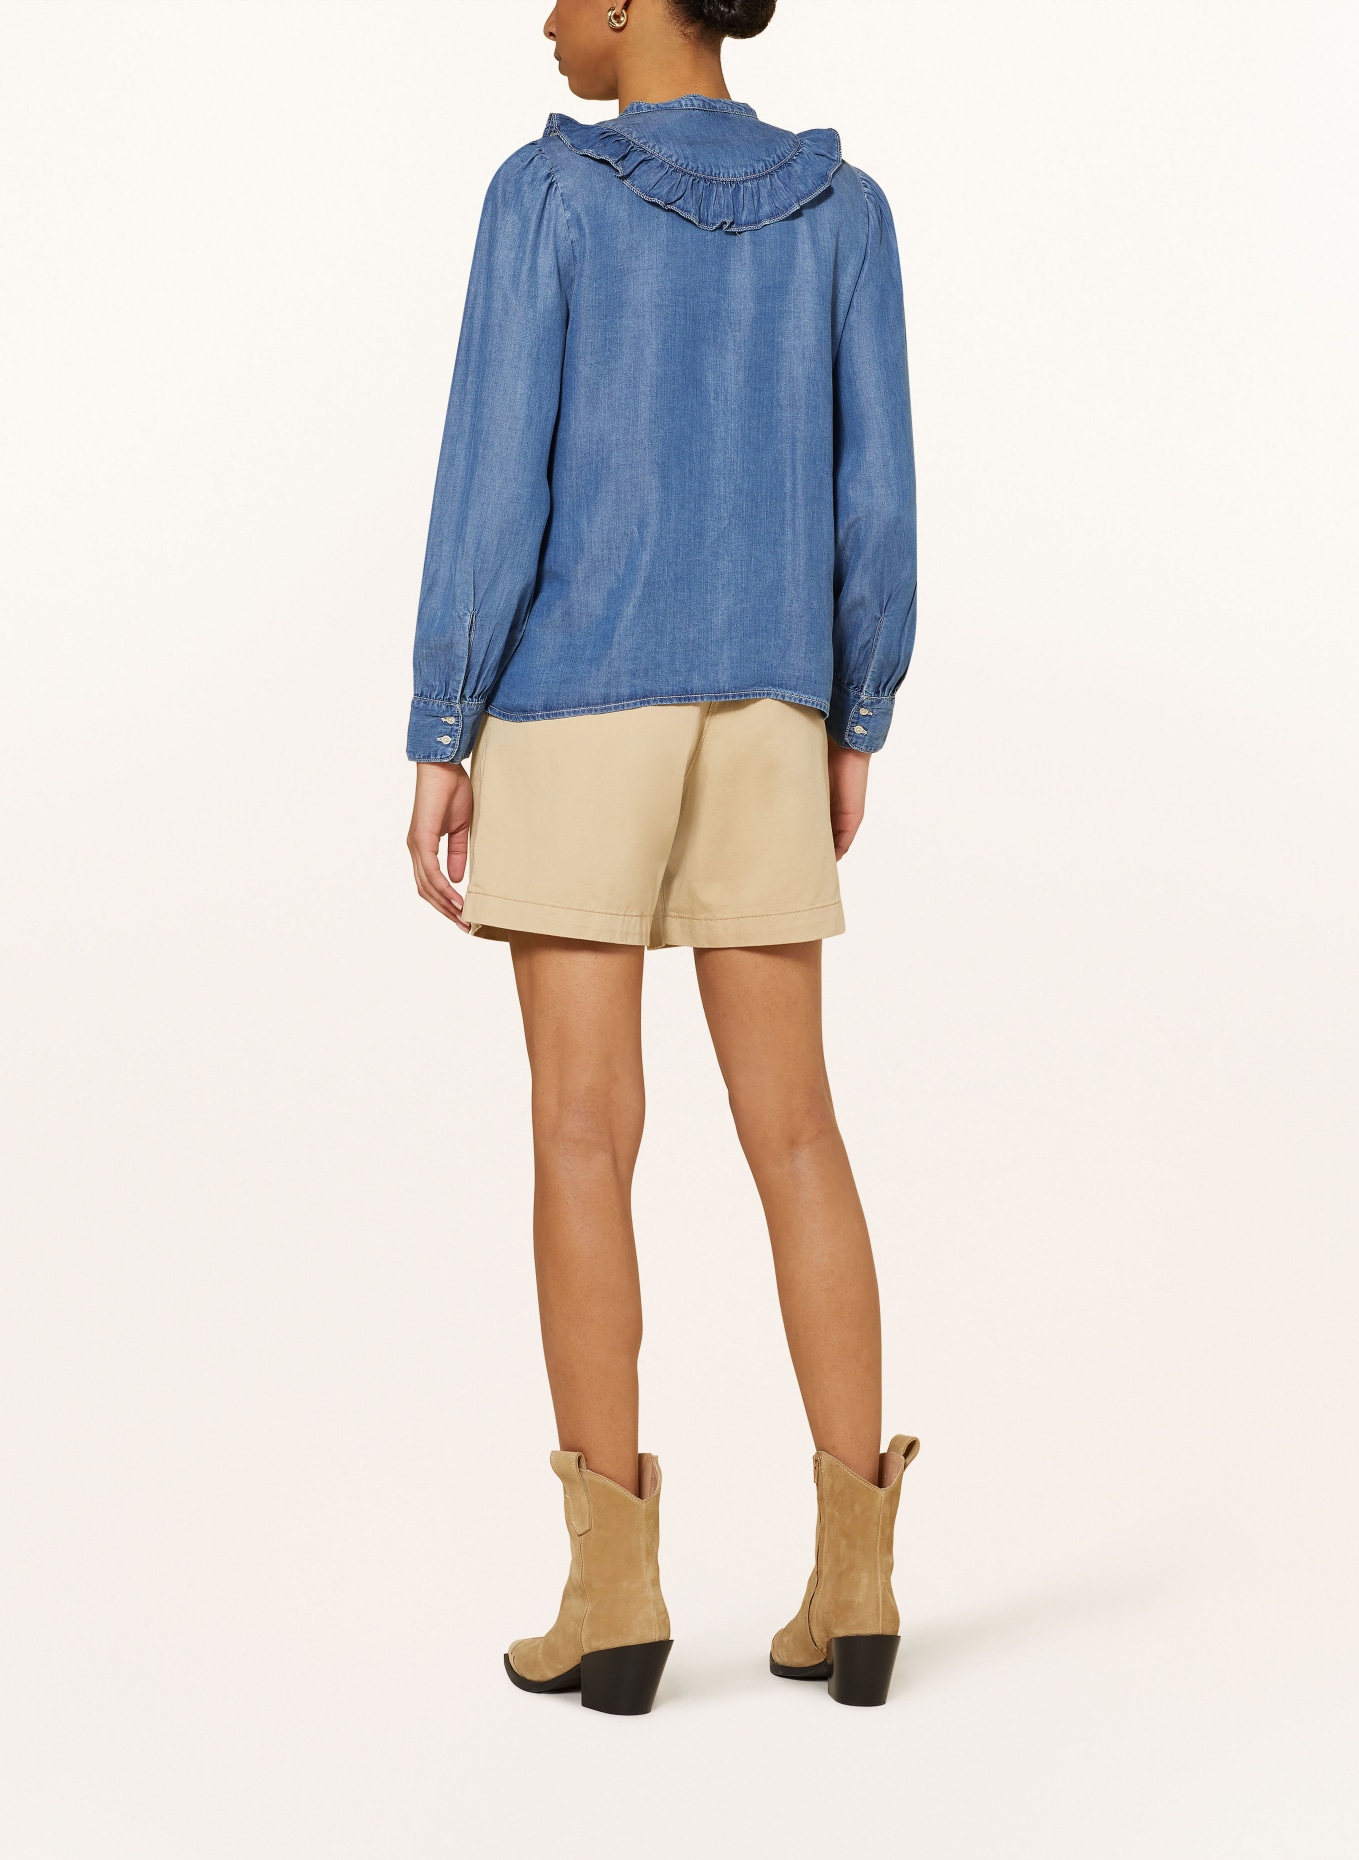 Levi's® Blouse CARINNA in denim look with ruffles, Color: BLUE (Image 3)